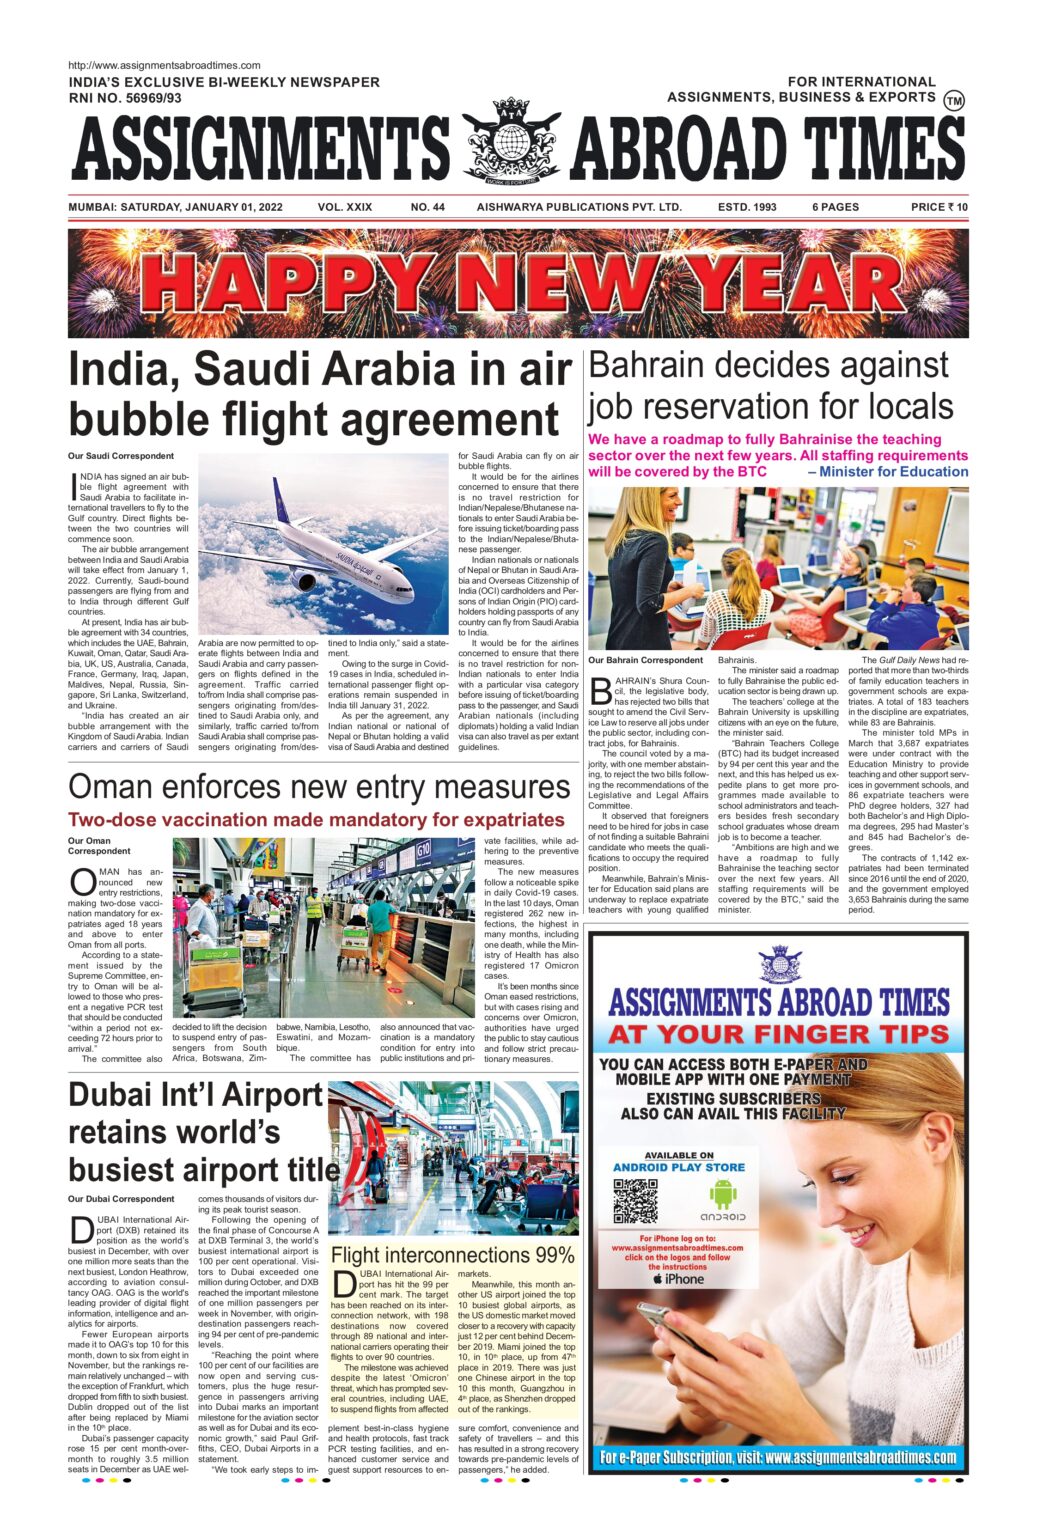 assignment abroad times epaper mumbai today